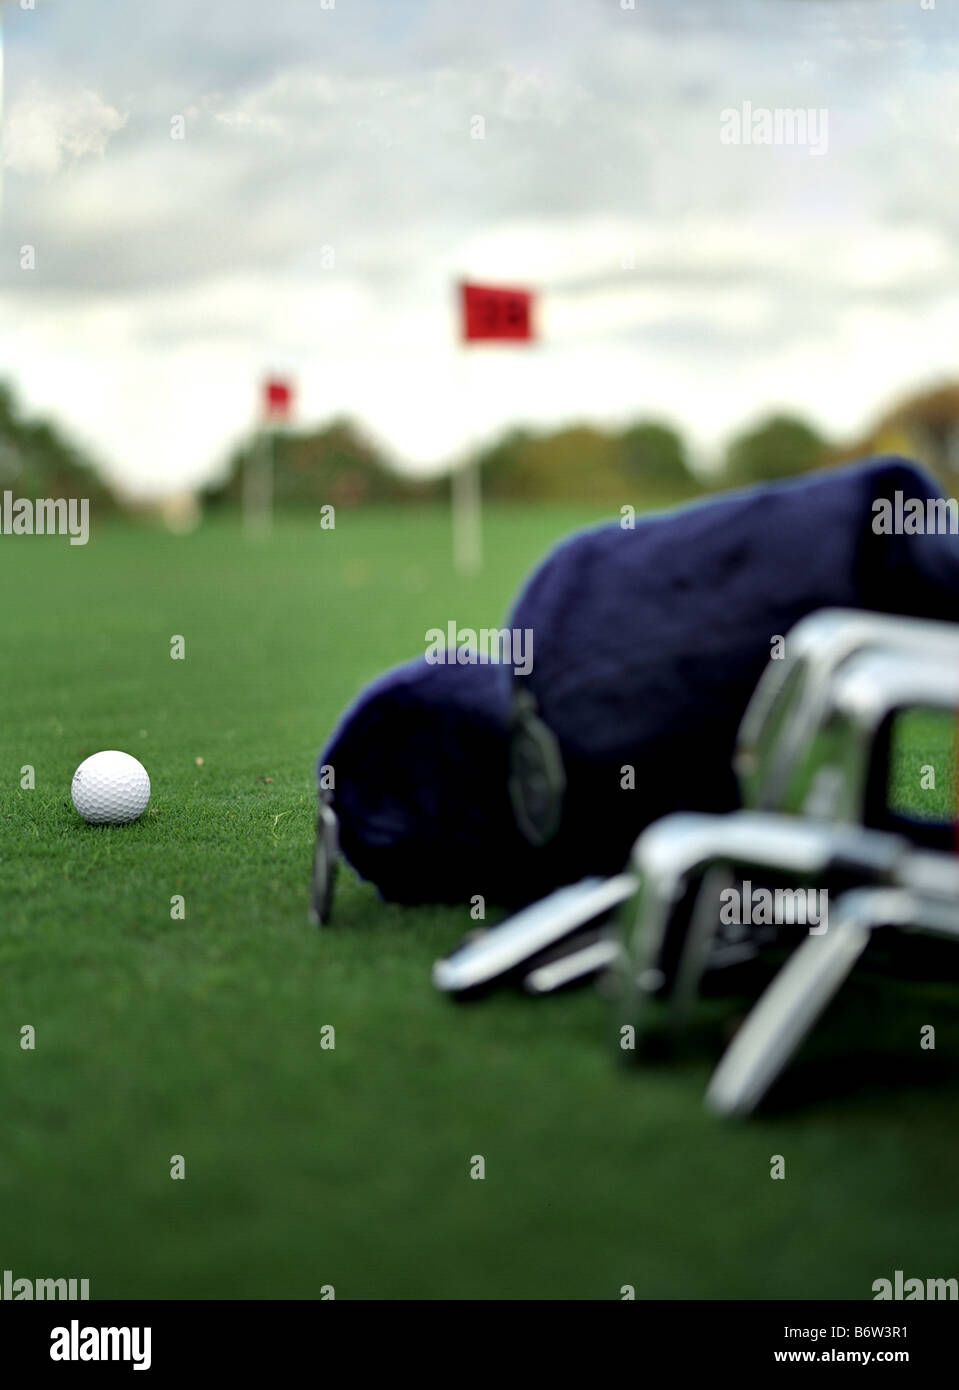 a singe golf ball placed on grass infront of a golf clubs Stock Photo